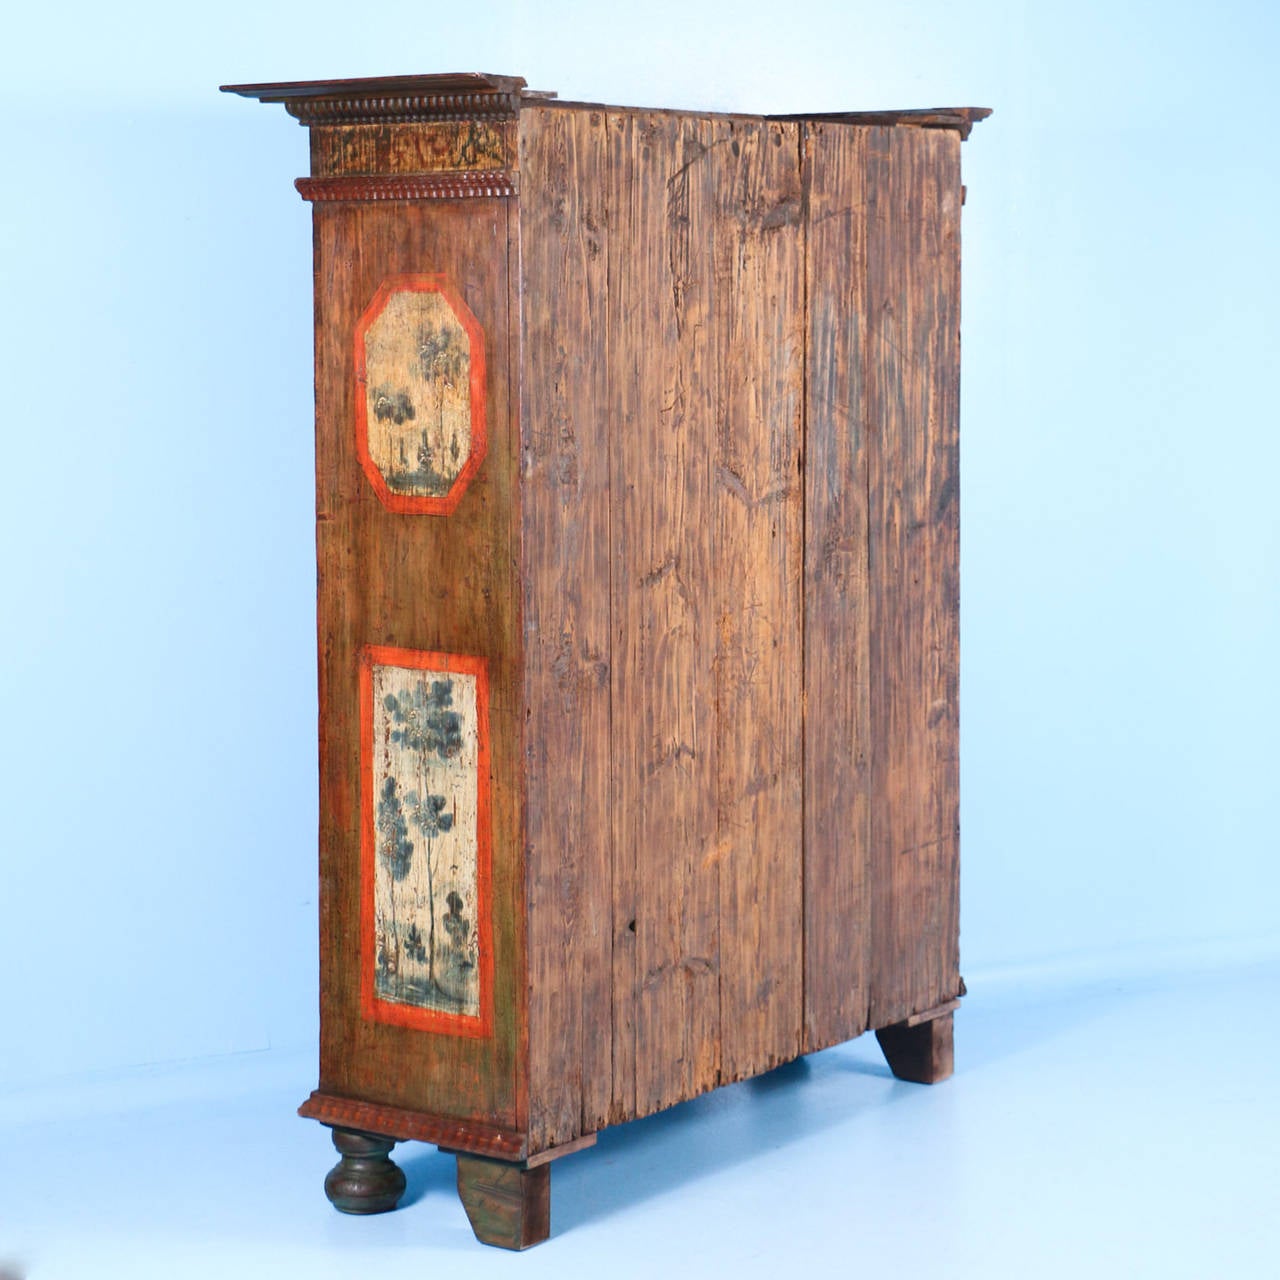 This large two-door armoire is dated, circa 1760s and still maintains its exclusive, Rustic patina in the paint. Although faded through the years, the paint is lovely. Please examine the close up photos to appreciate the Silhouette of trees in